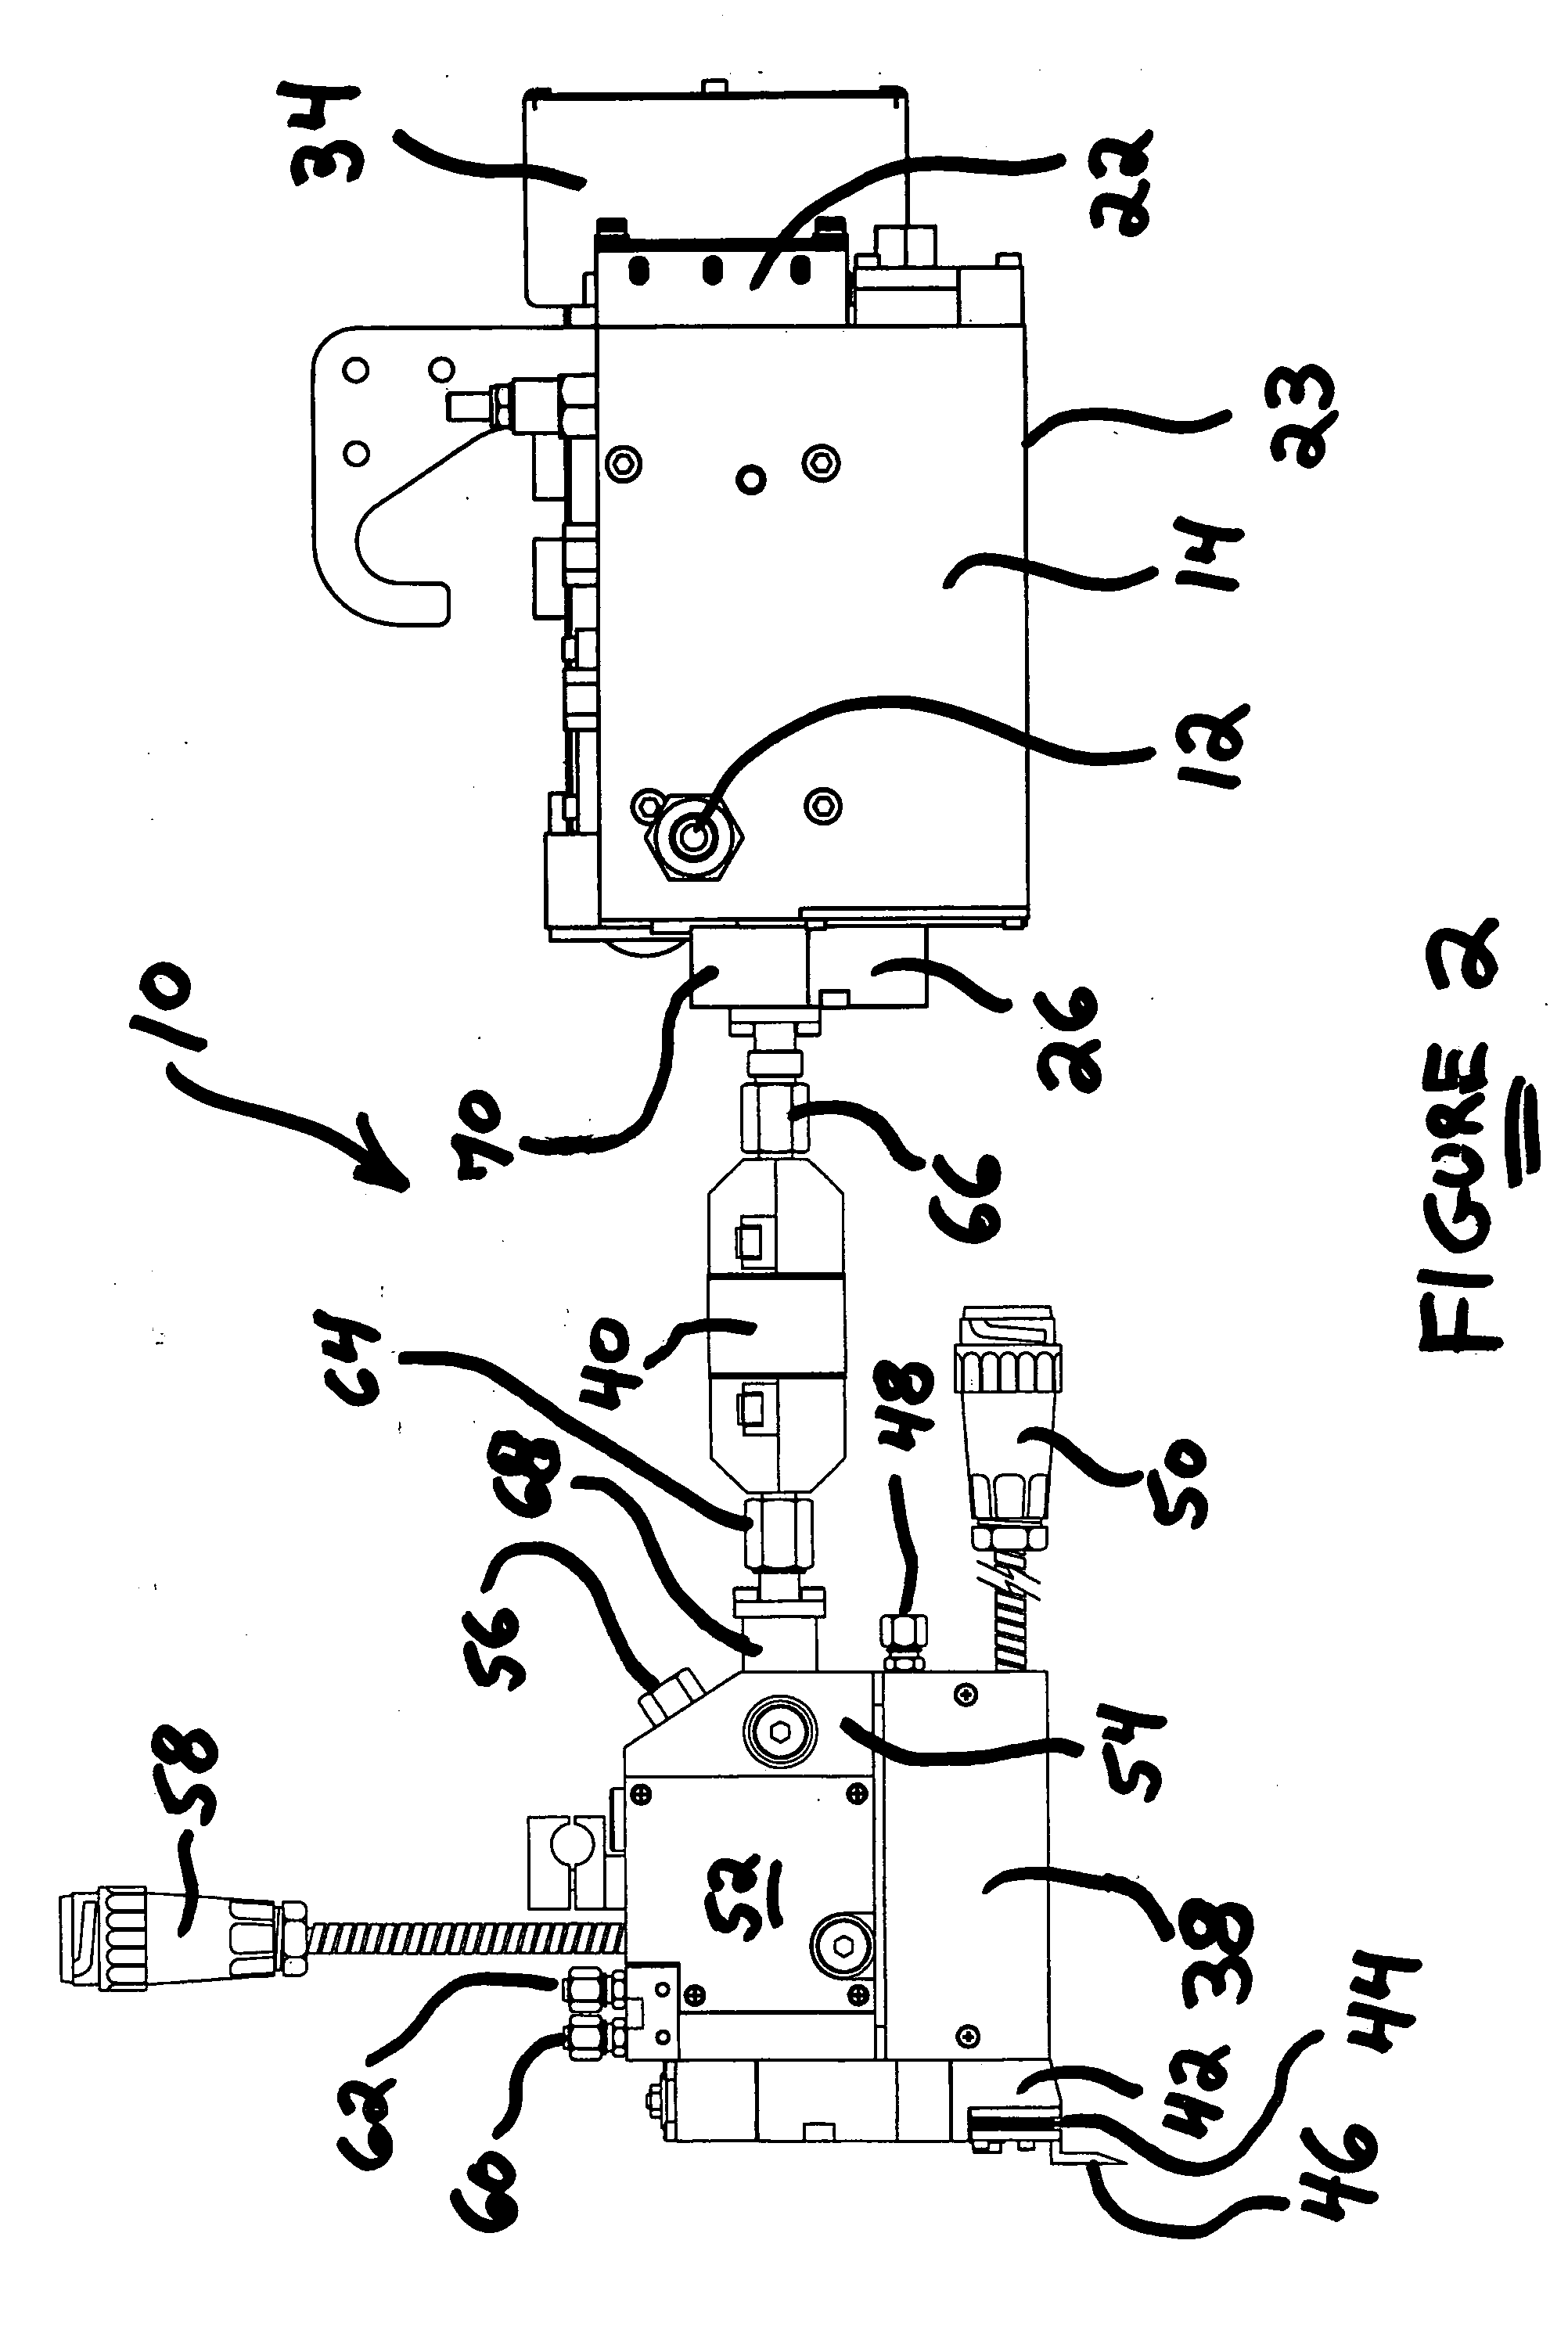 Remote metering station and applicator heads interconnected by means of relatively short hoses with universal connectors